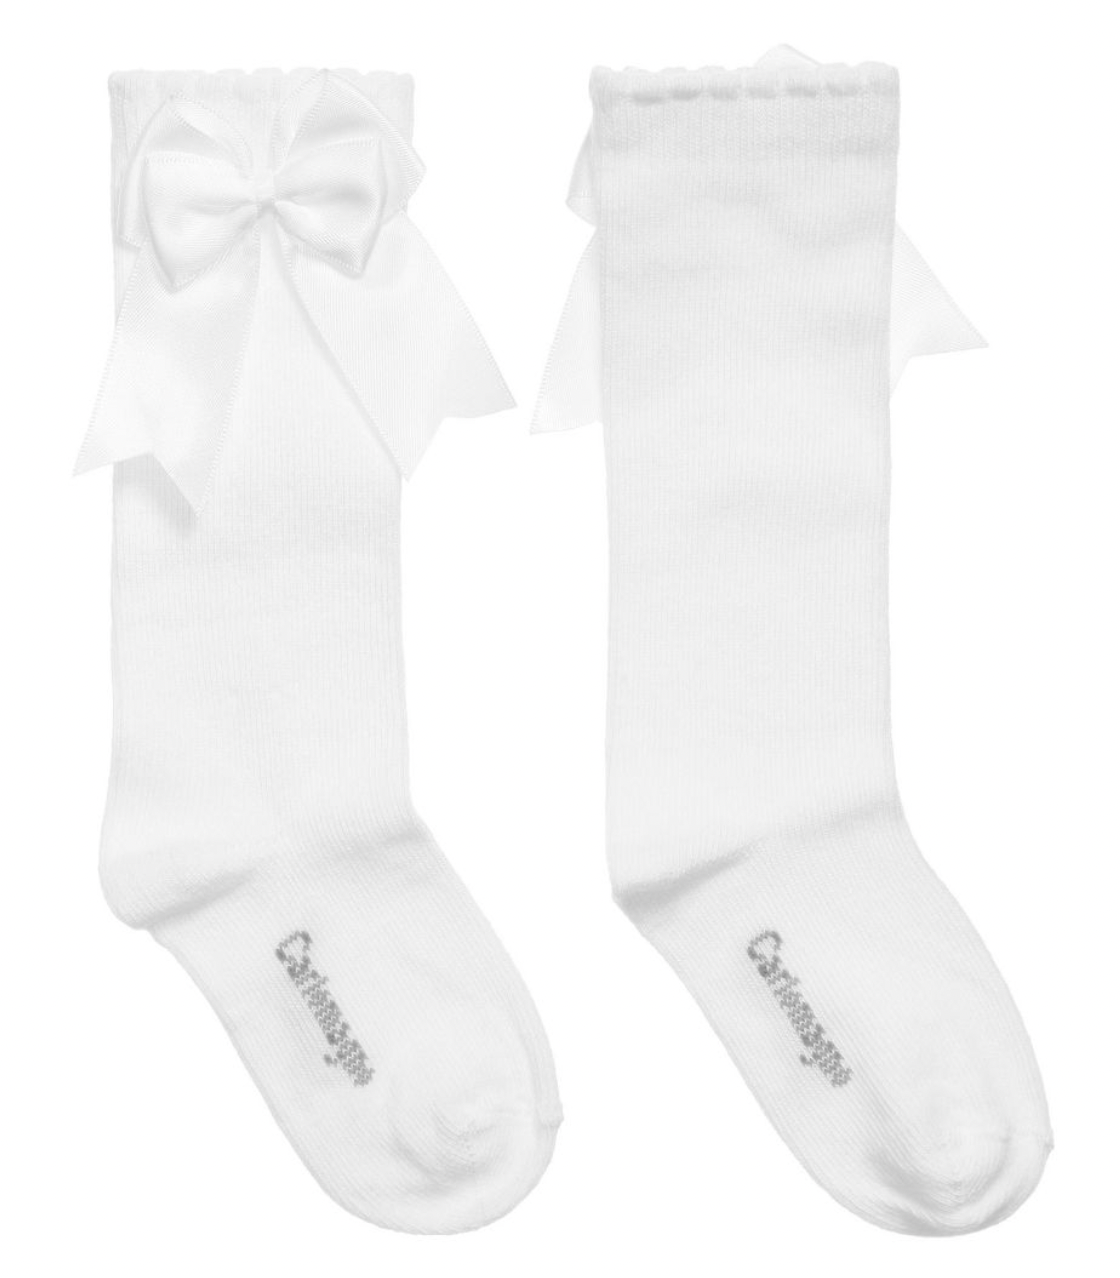 Carlomagno Knee High Socks with Bow - White